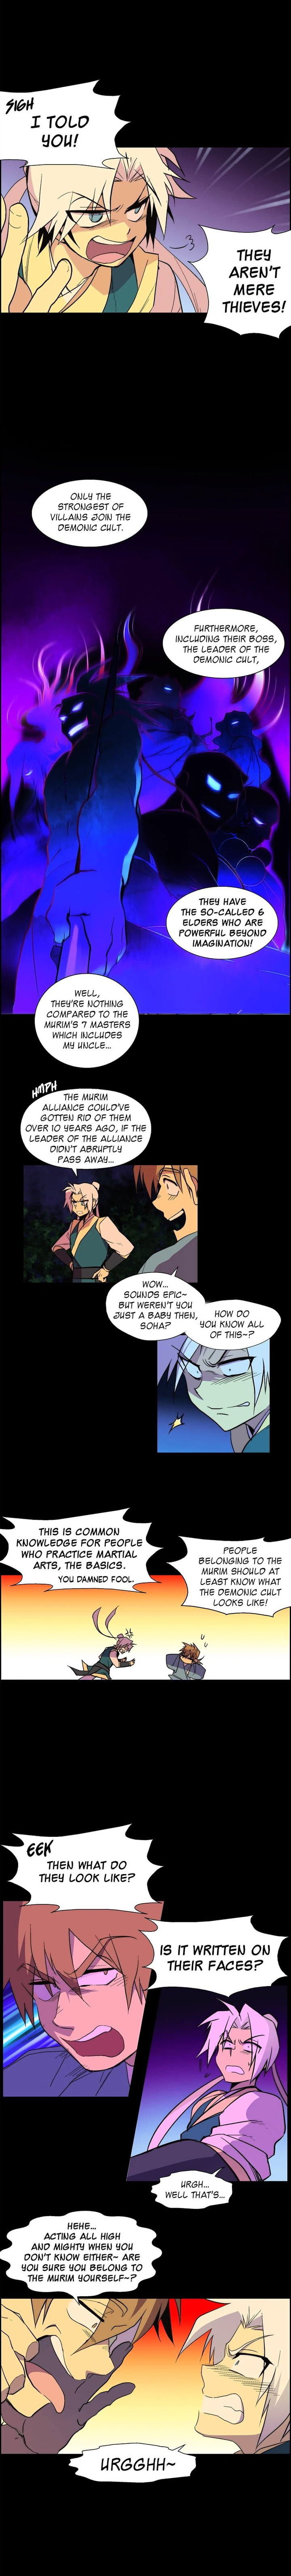 Cold Moon Chronicles Chapter 5 Page 3